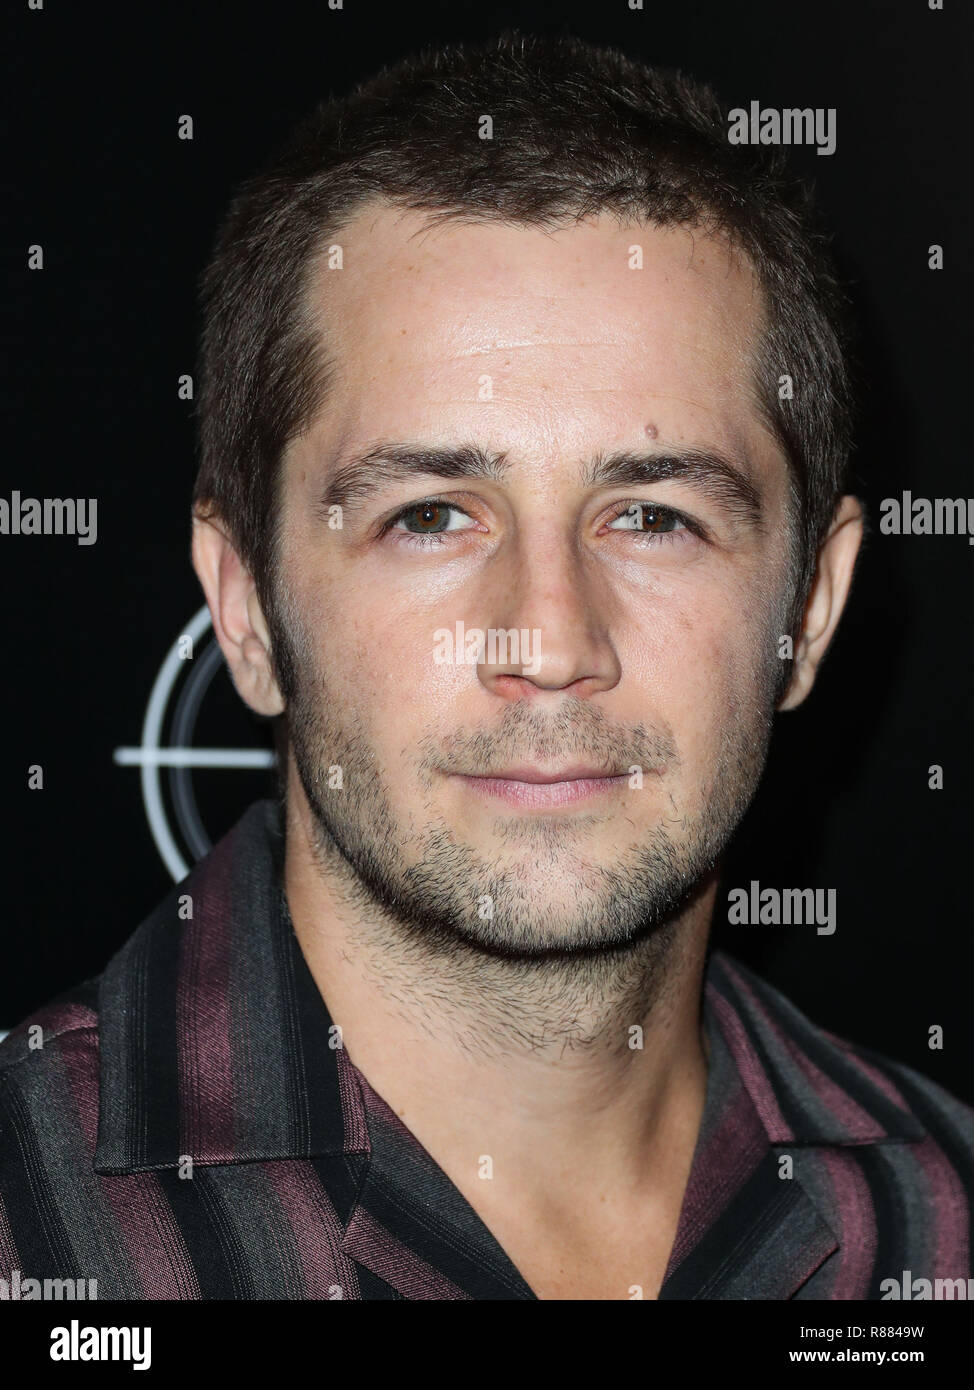 https://c8.alamy.com/comp/R8849W/west-hollywood-los-angeles-ca-usa-october-30-michael-angarano-at-the-los-angeles-premiere-of-vertical-entertainments-in-a-relationship-held-at-the-london-west-hollywood-screening-room-on-october-30-2018-in-west-hollywood-los-angeles-california-united-states-photo-by-xavier-collinimage-press-agency-R8849W.jpg